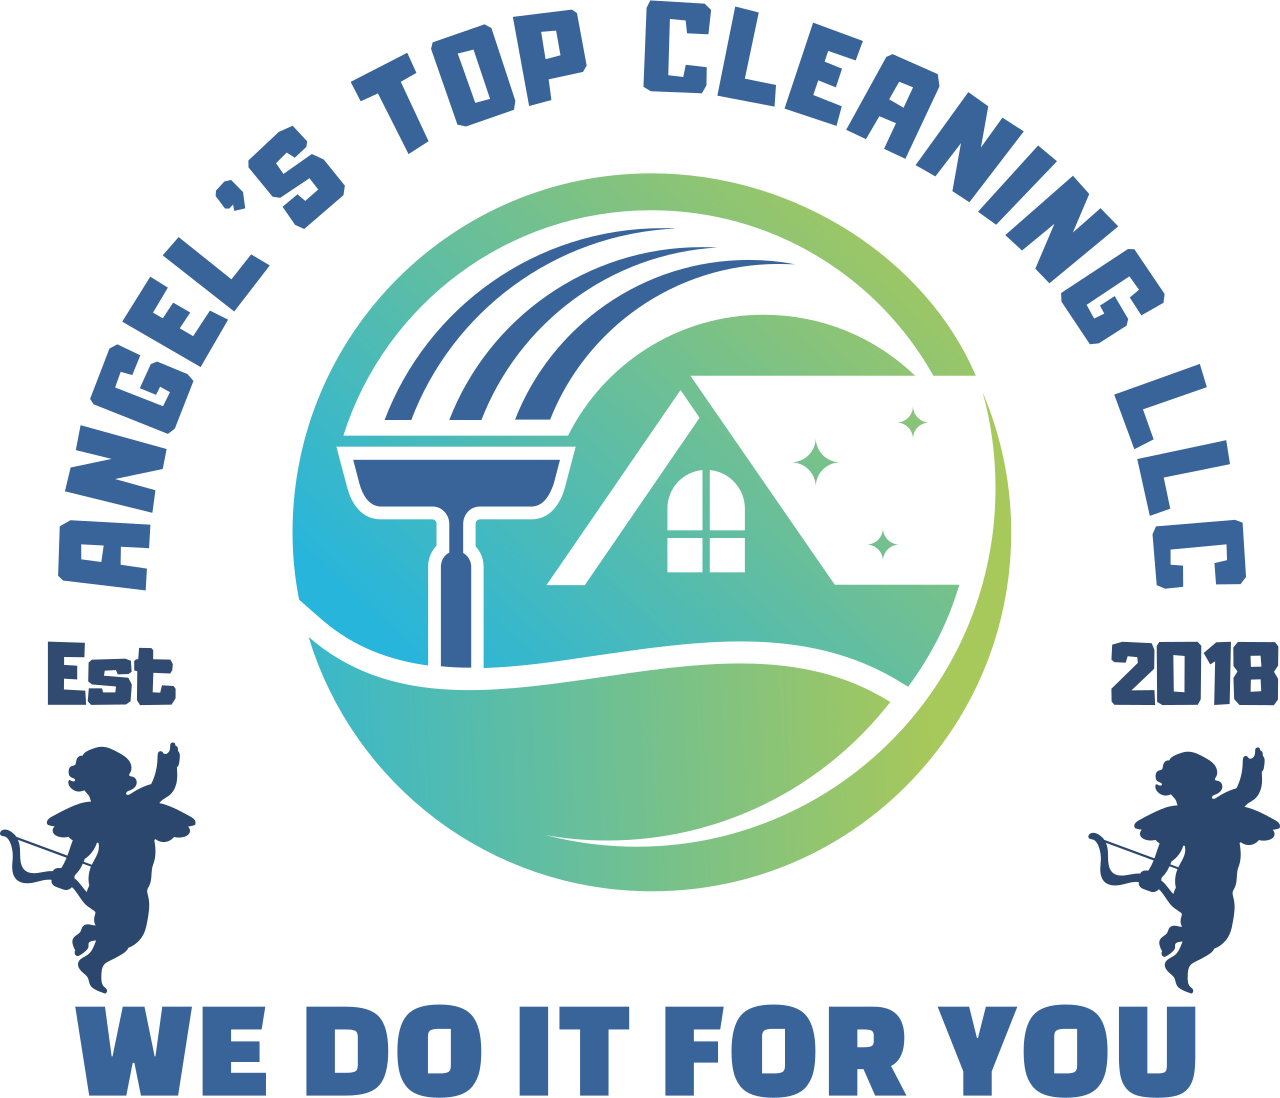 ANGEL'S TOP CLEANING LLC's logo